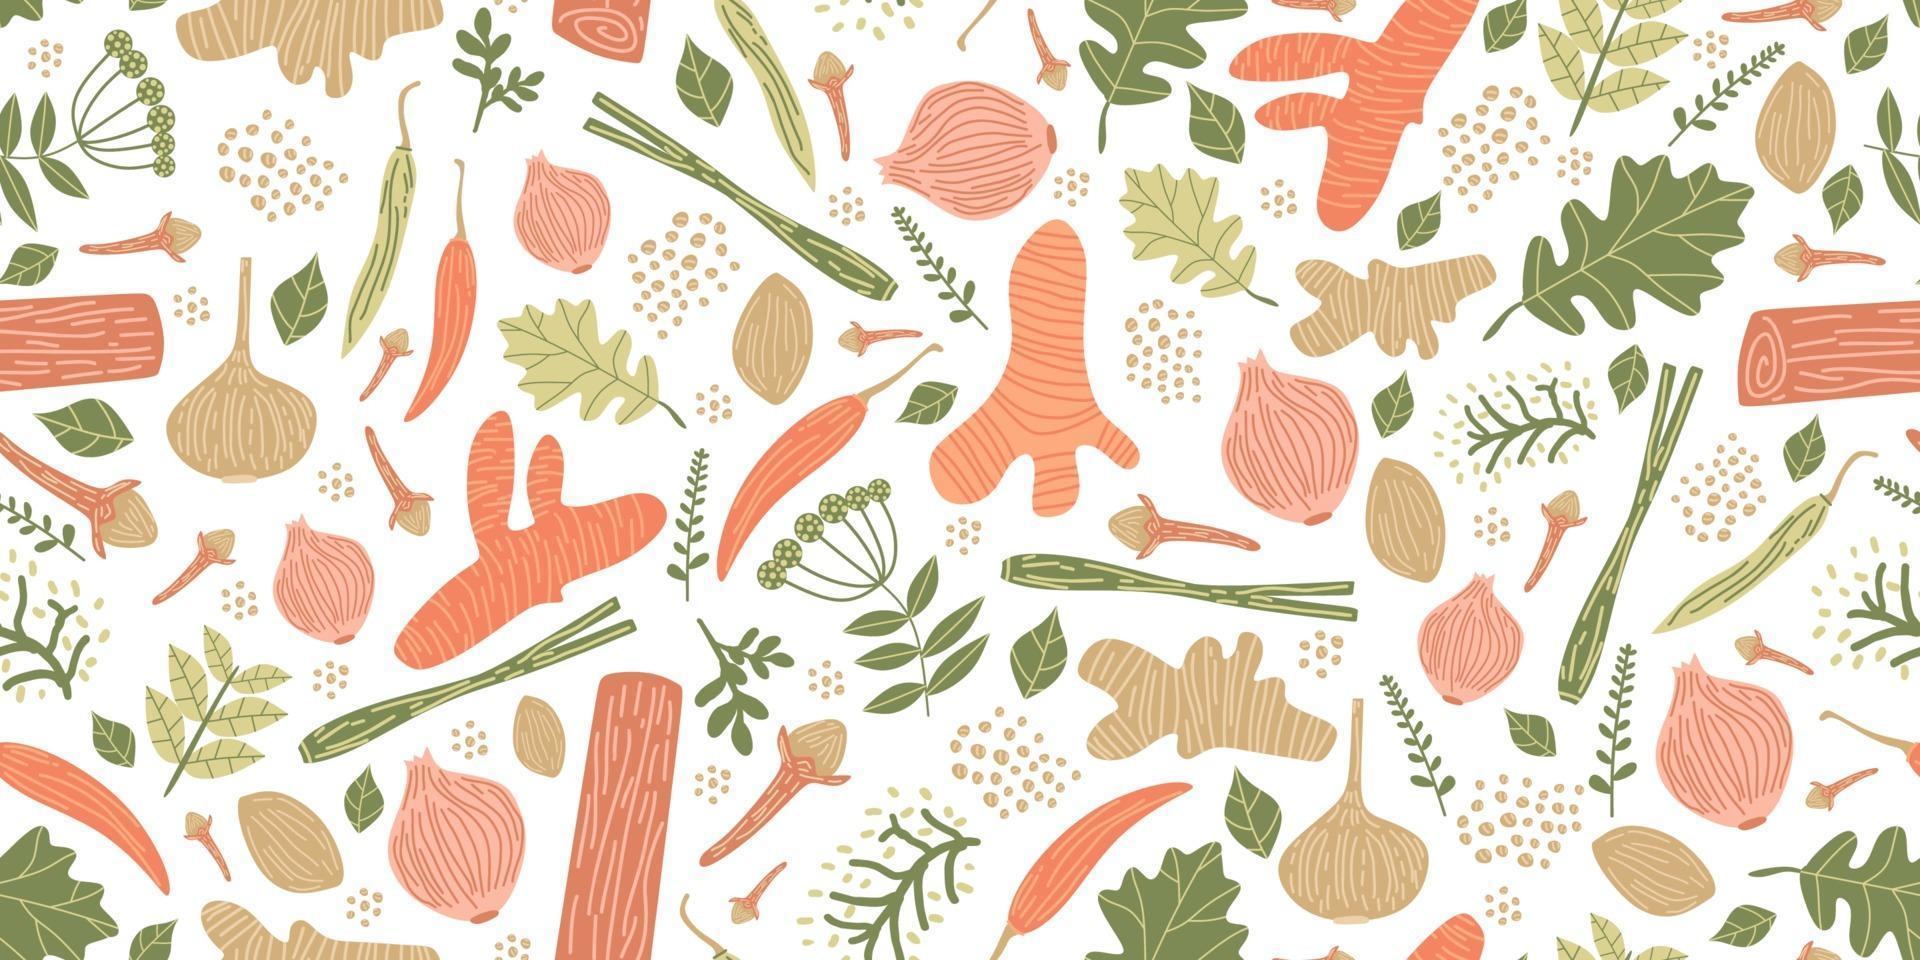 Seamless pattern with herbs and spices hand drawn vector